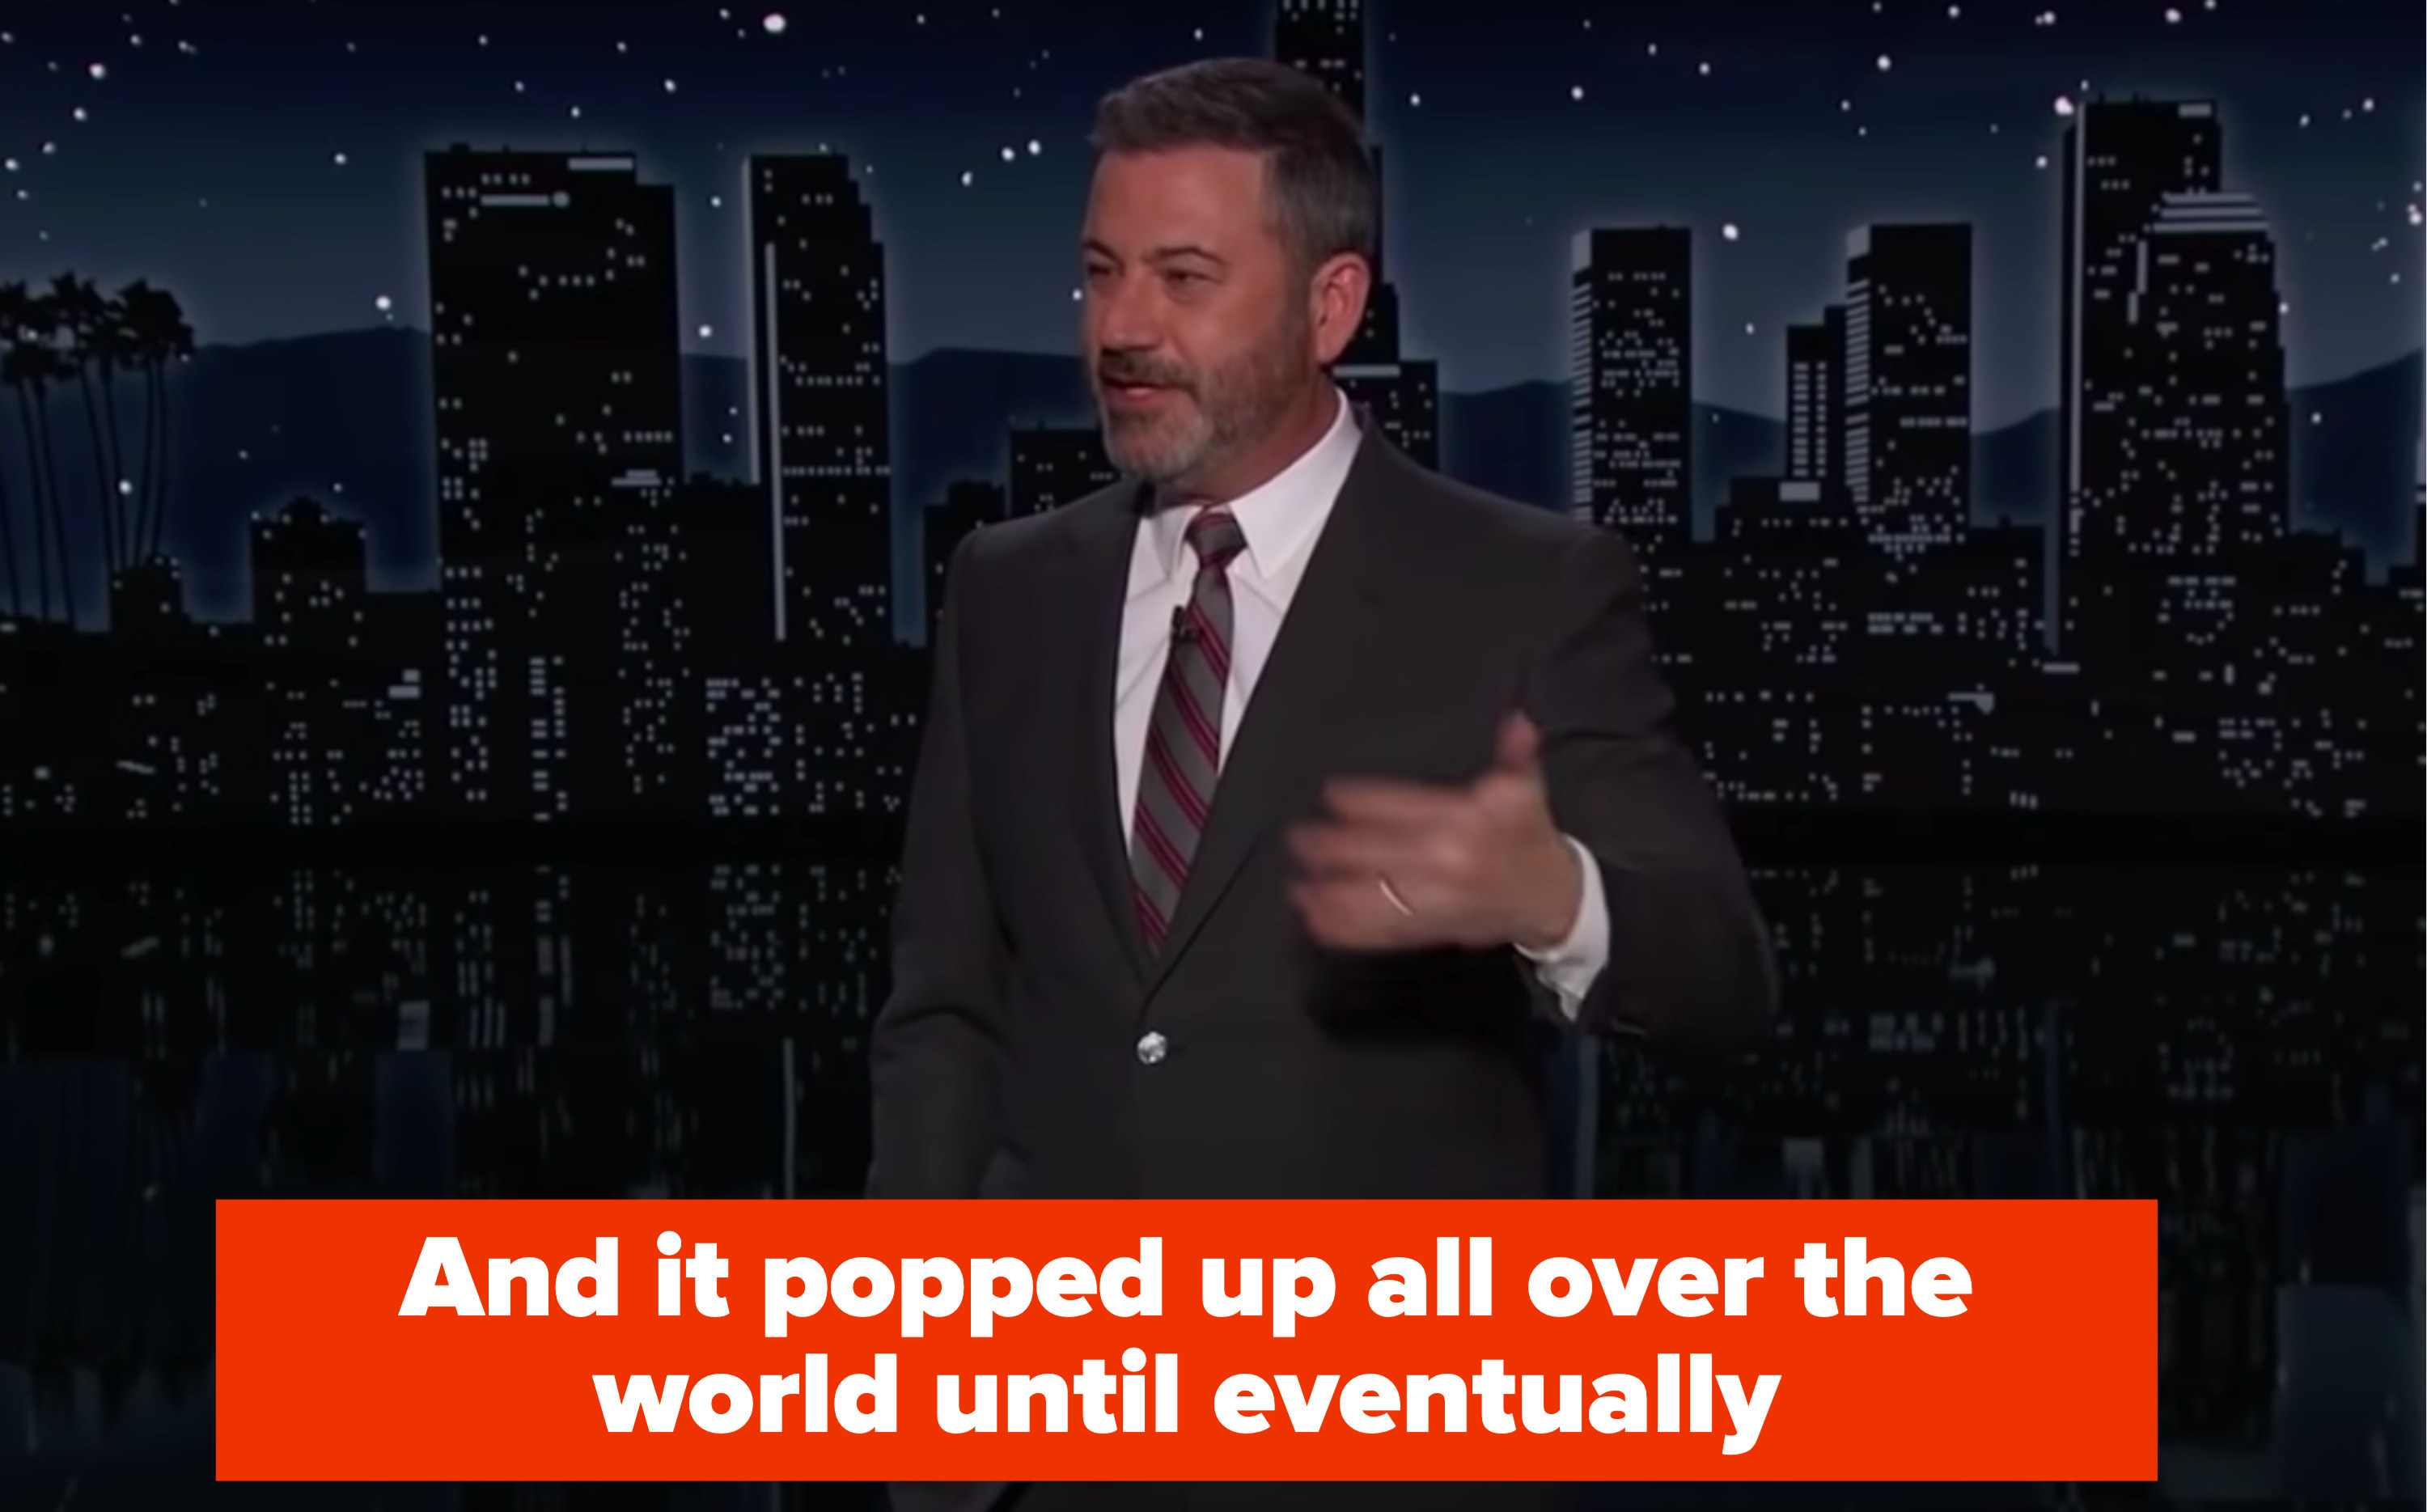 Jimmy: &quot;and it popped up all over the world until eventually&quot;